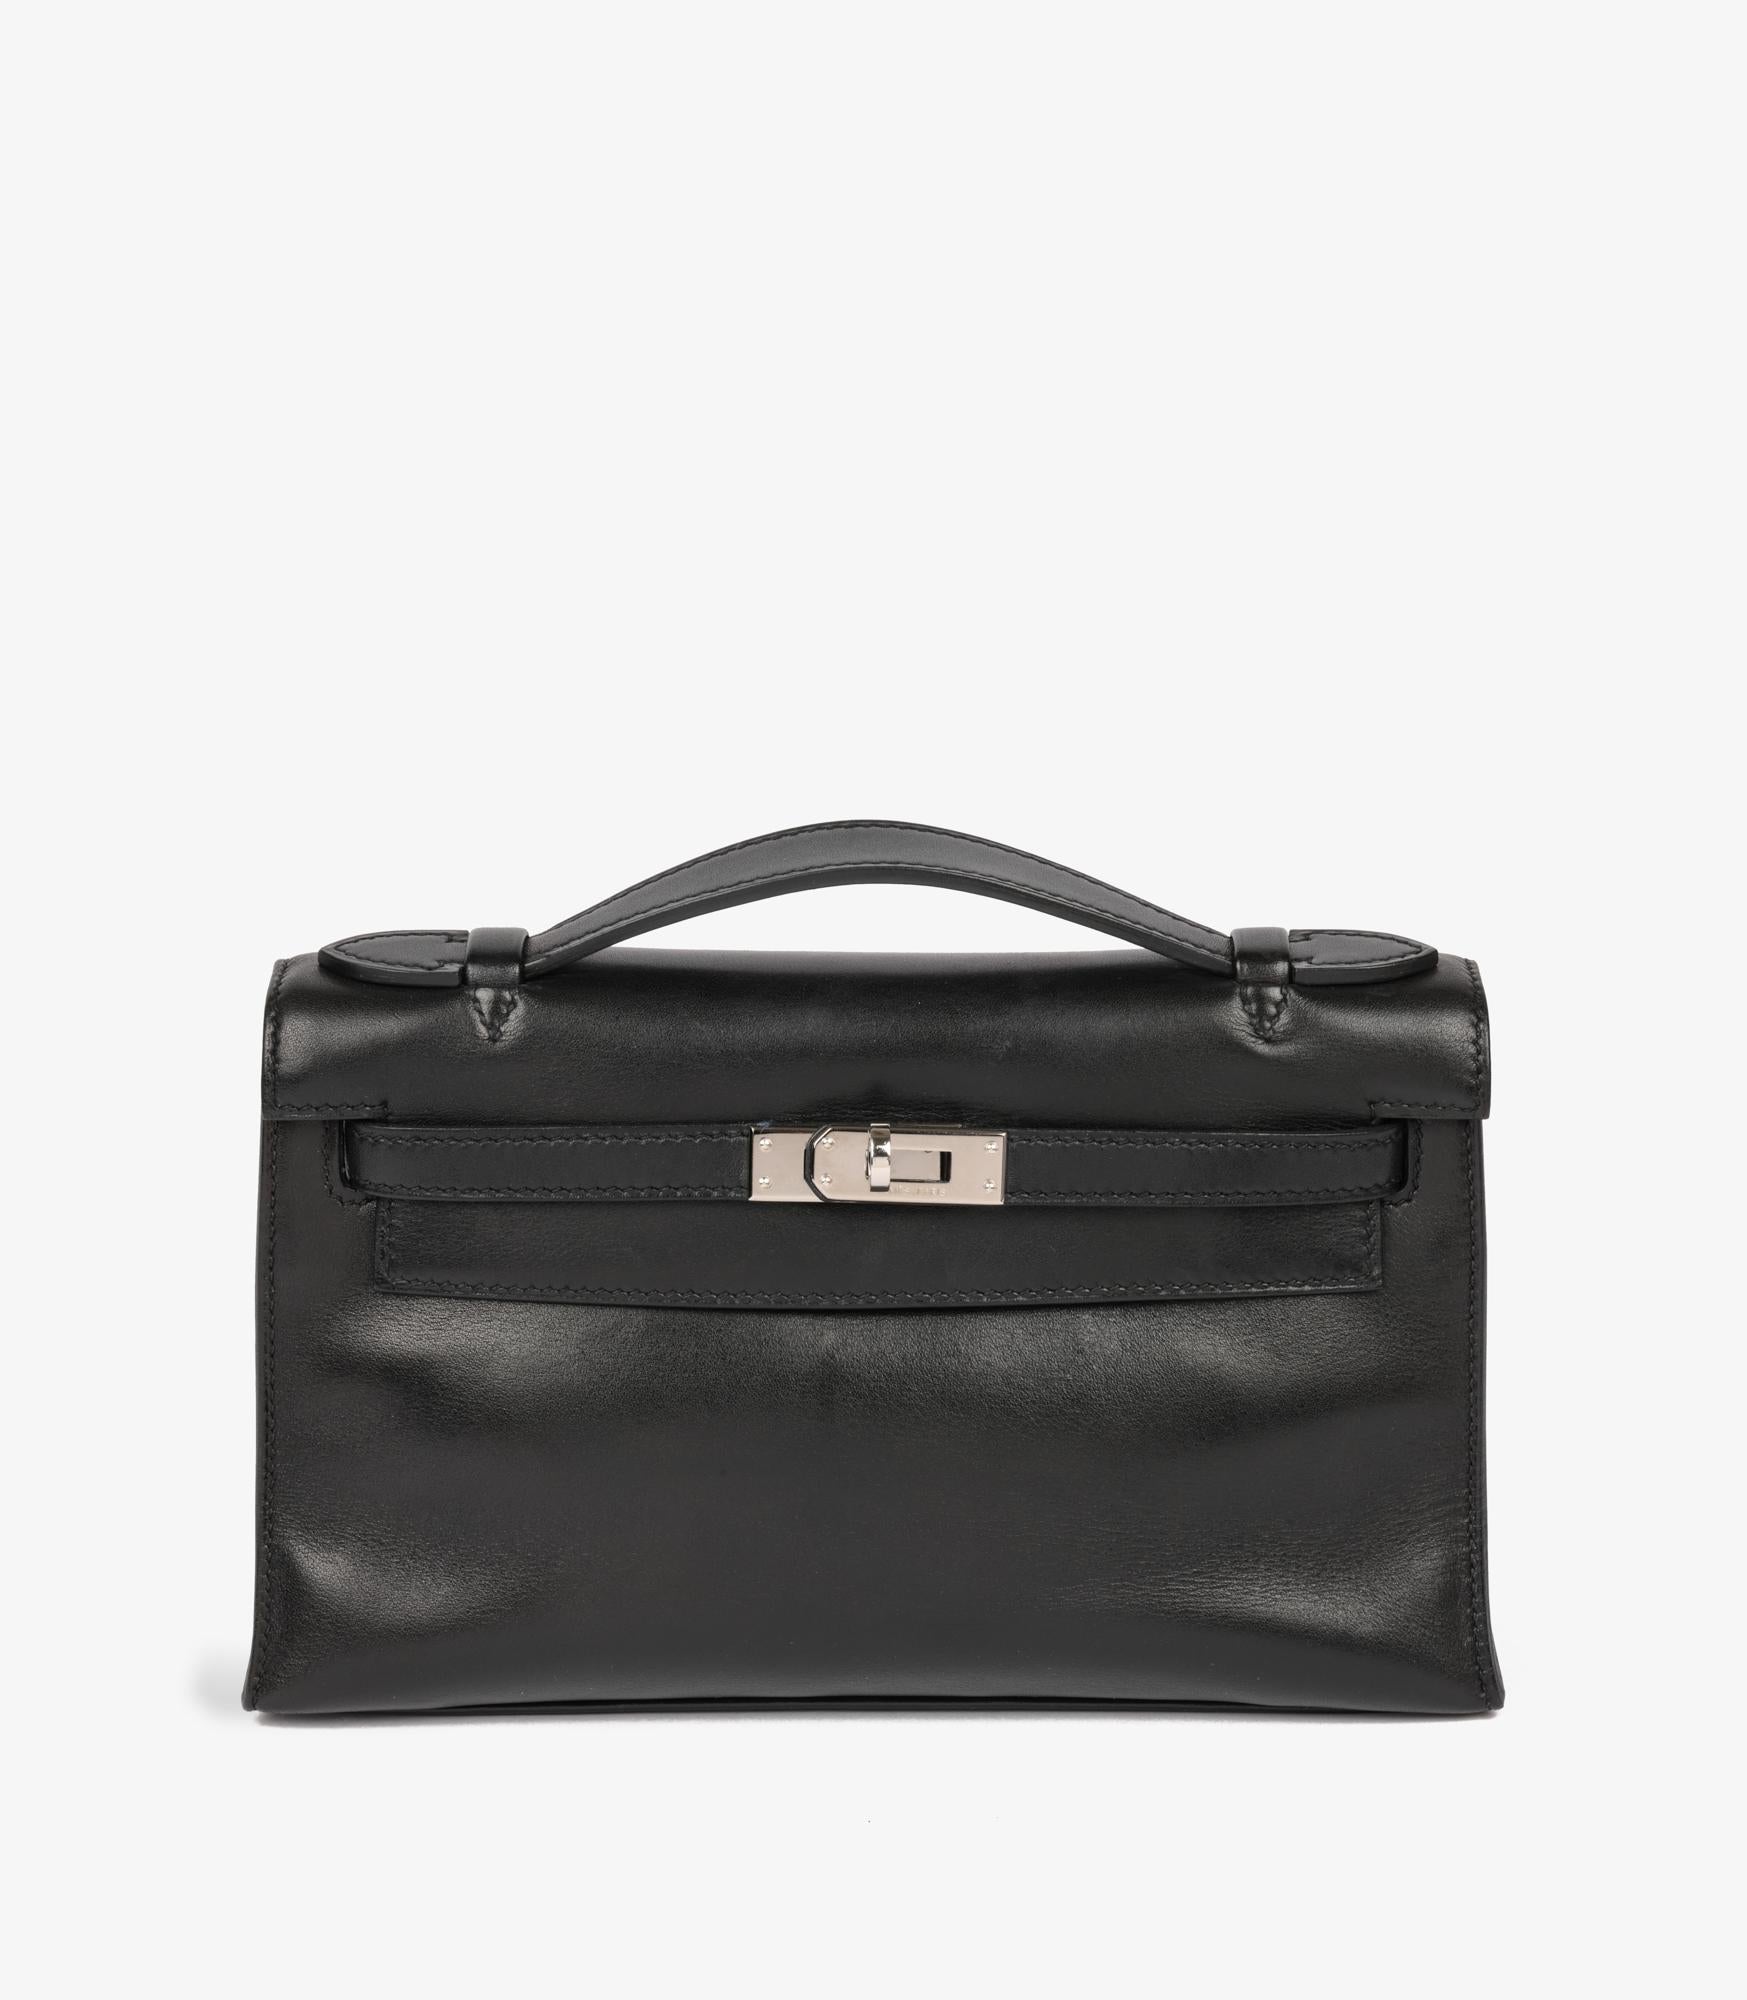 Hermès Black Swift Leather Kelly Pochette

Brand- Hermès
Model- Kelly Pochette
Product Type- Top Handle
Serial Number- T
Age- Circa 2015
Accompanied By- Hermès Dust Bag
Colour- Black
Hardware- Palladium
Material(s)- Swift Leather
Authenticity